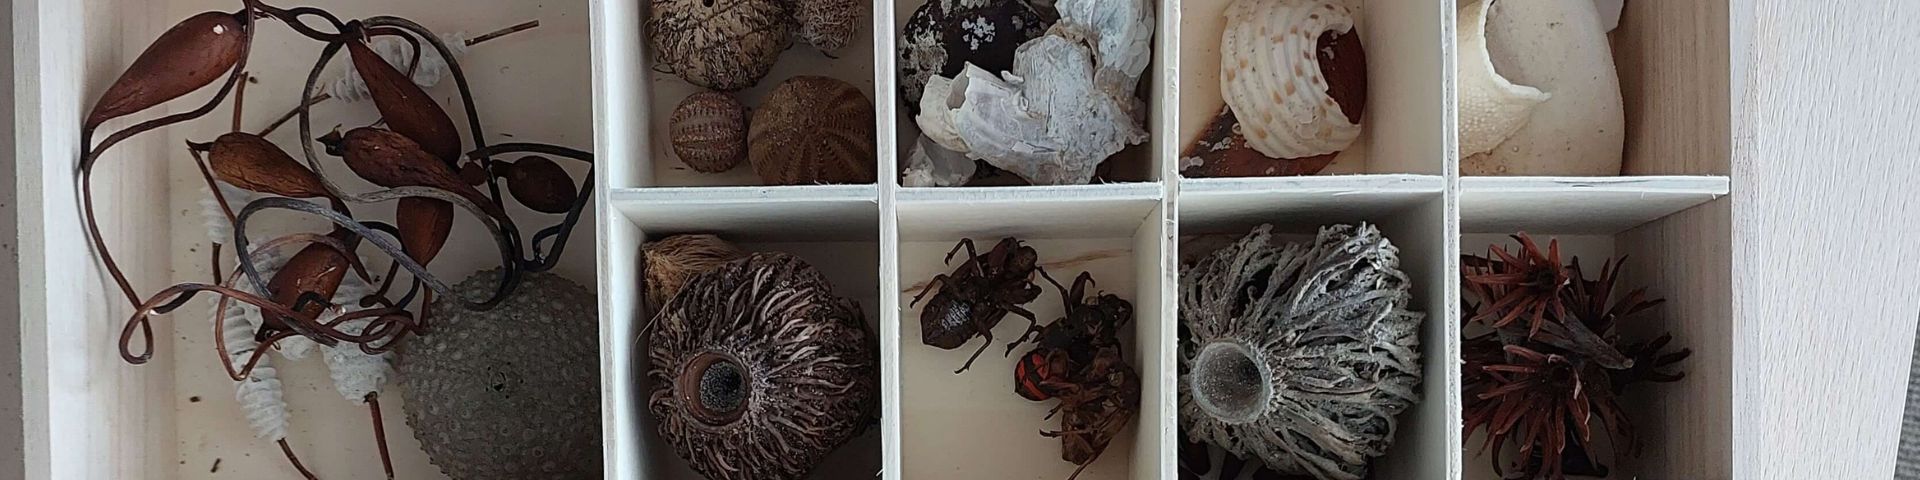 Wooden box of natural objects collected from the beach